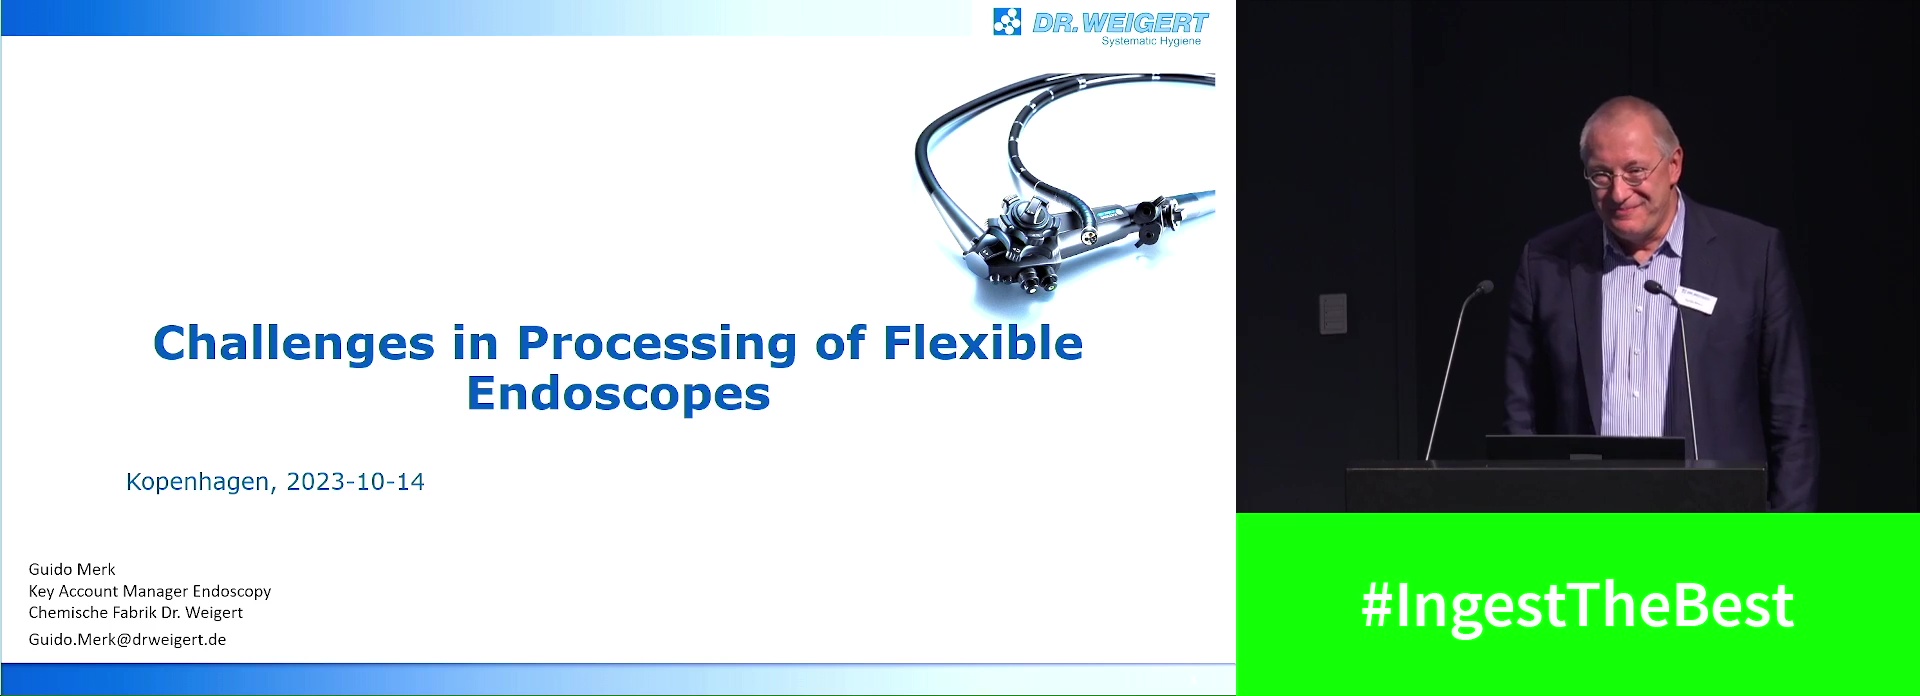 Challenges in reprocessing of flexible endoscopes